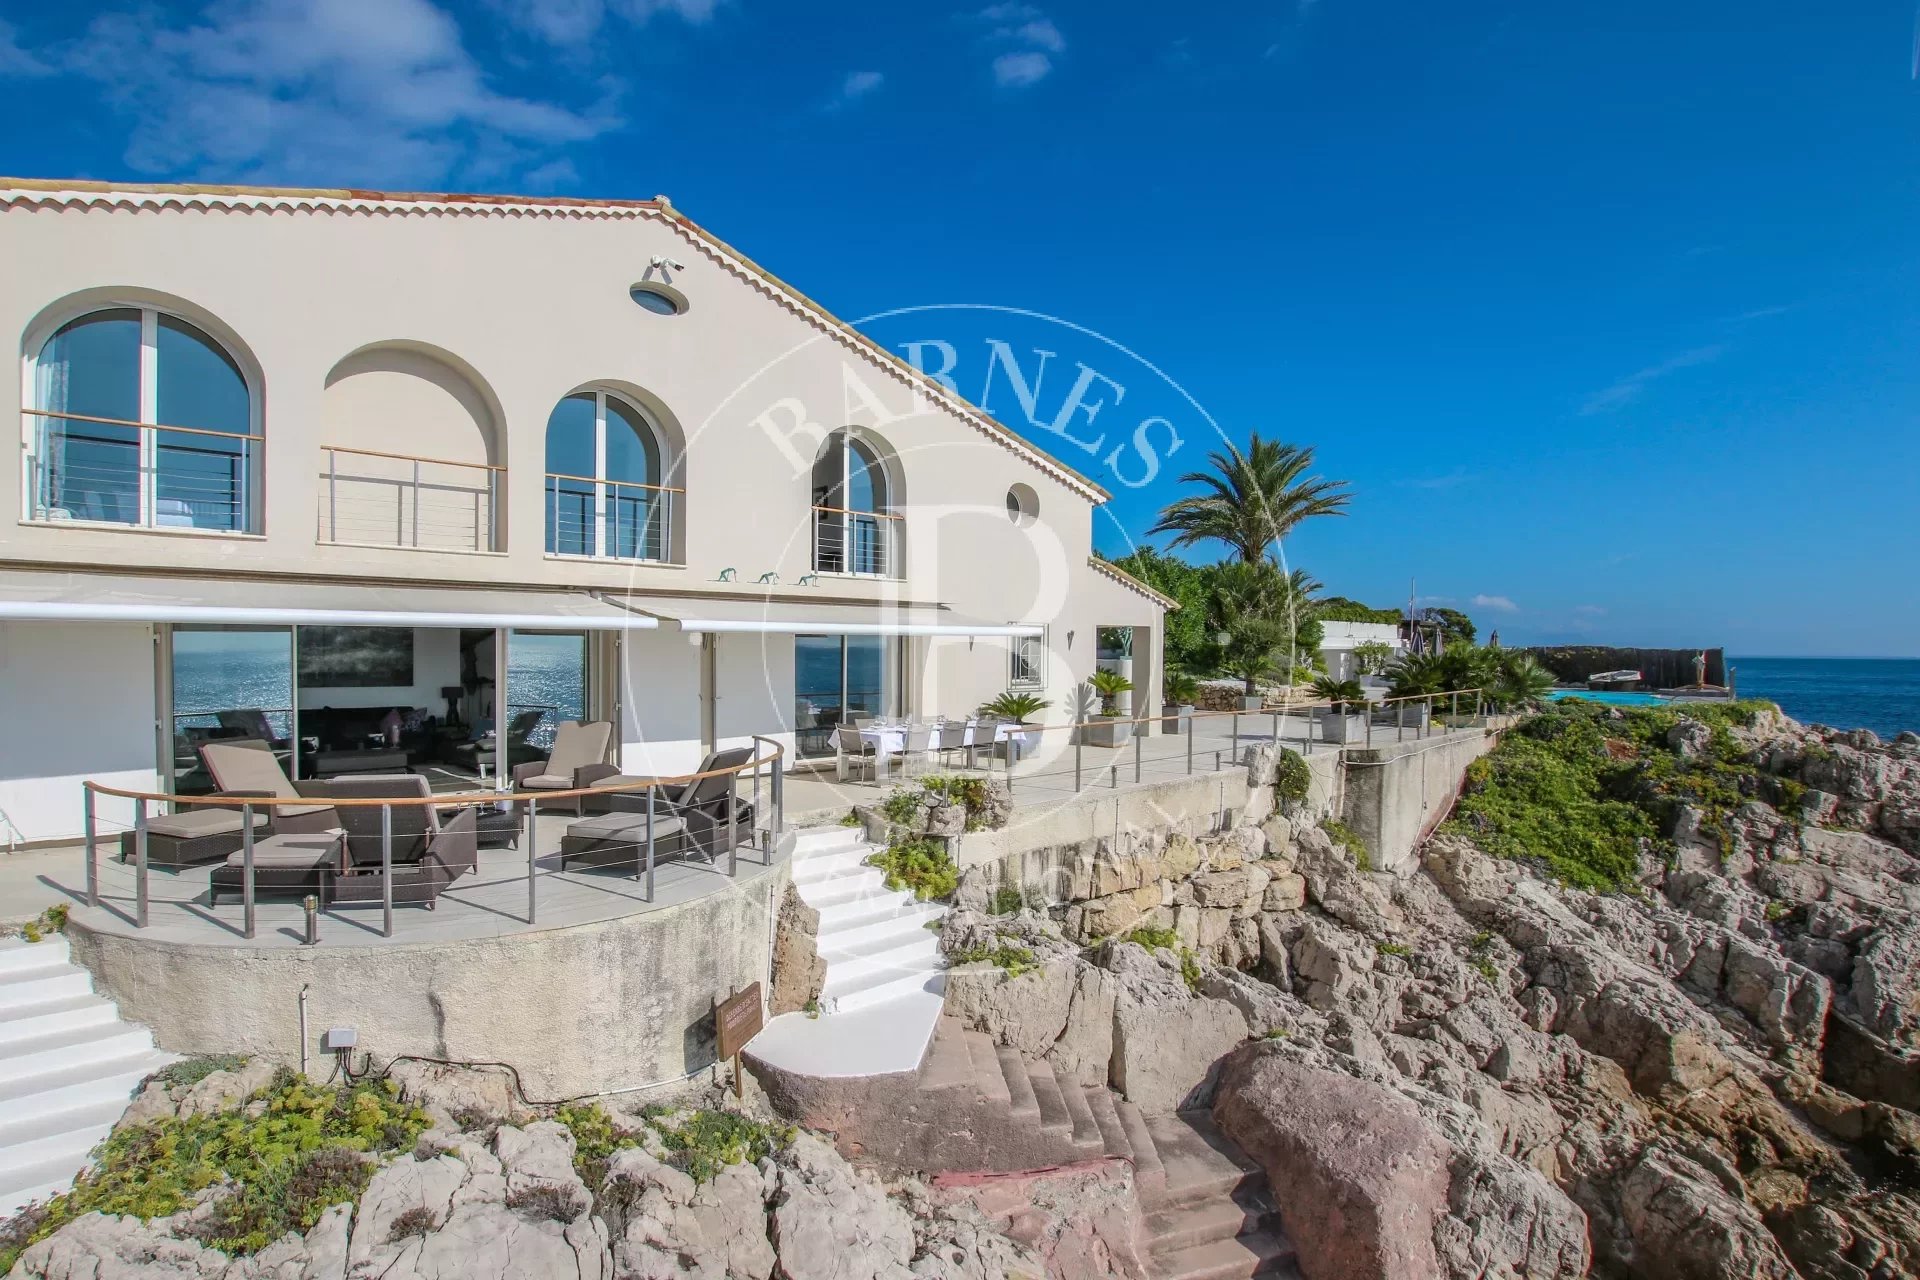 Villa Antibes - picture 2 title=